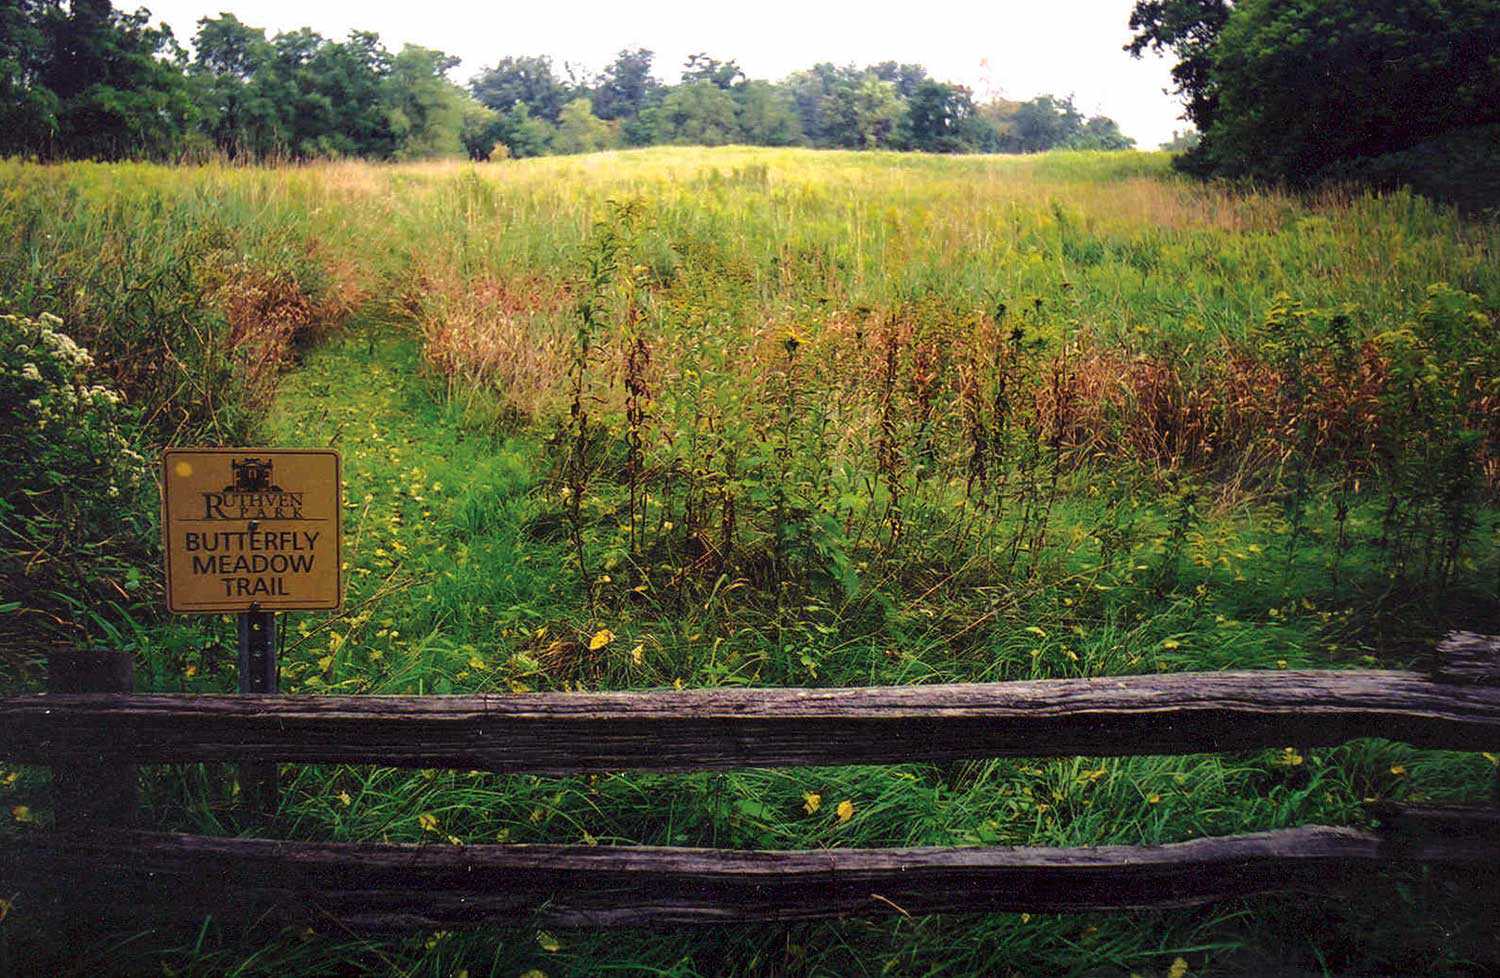 A large butterfly meadow in Ruthven Park